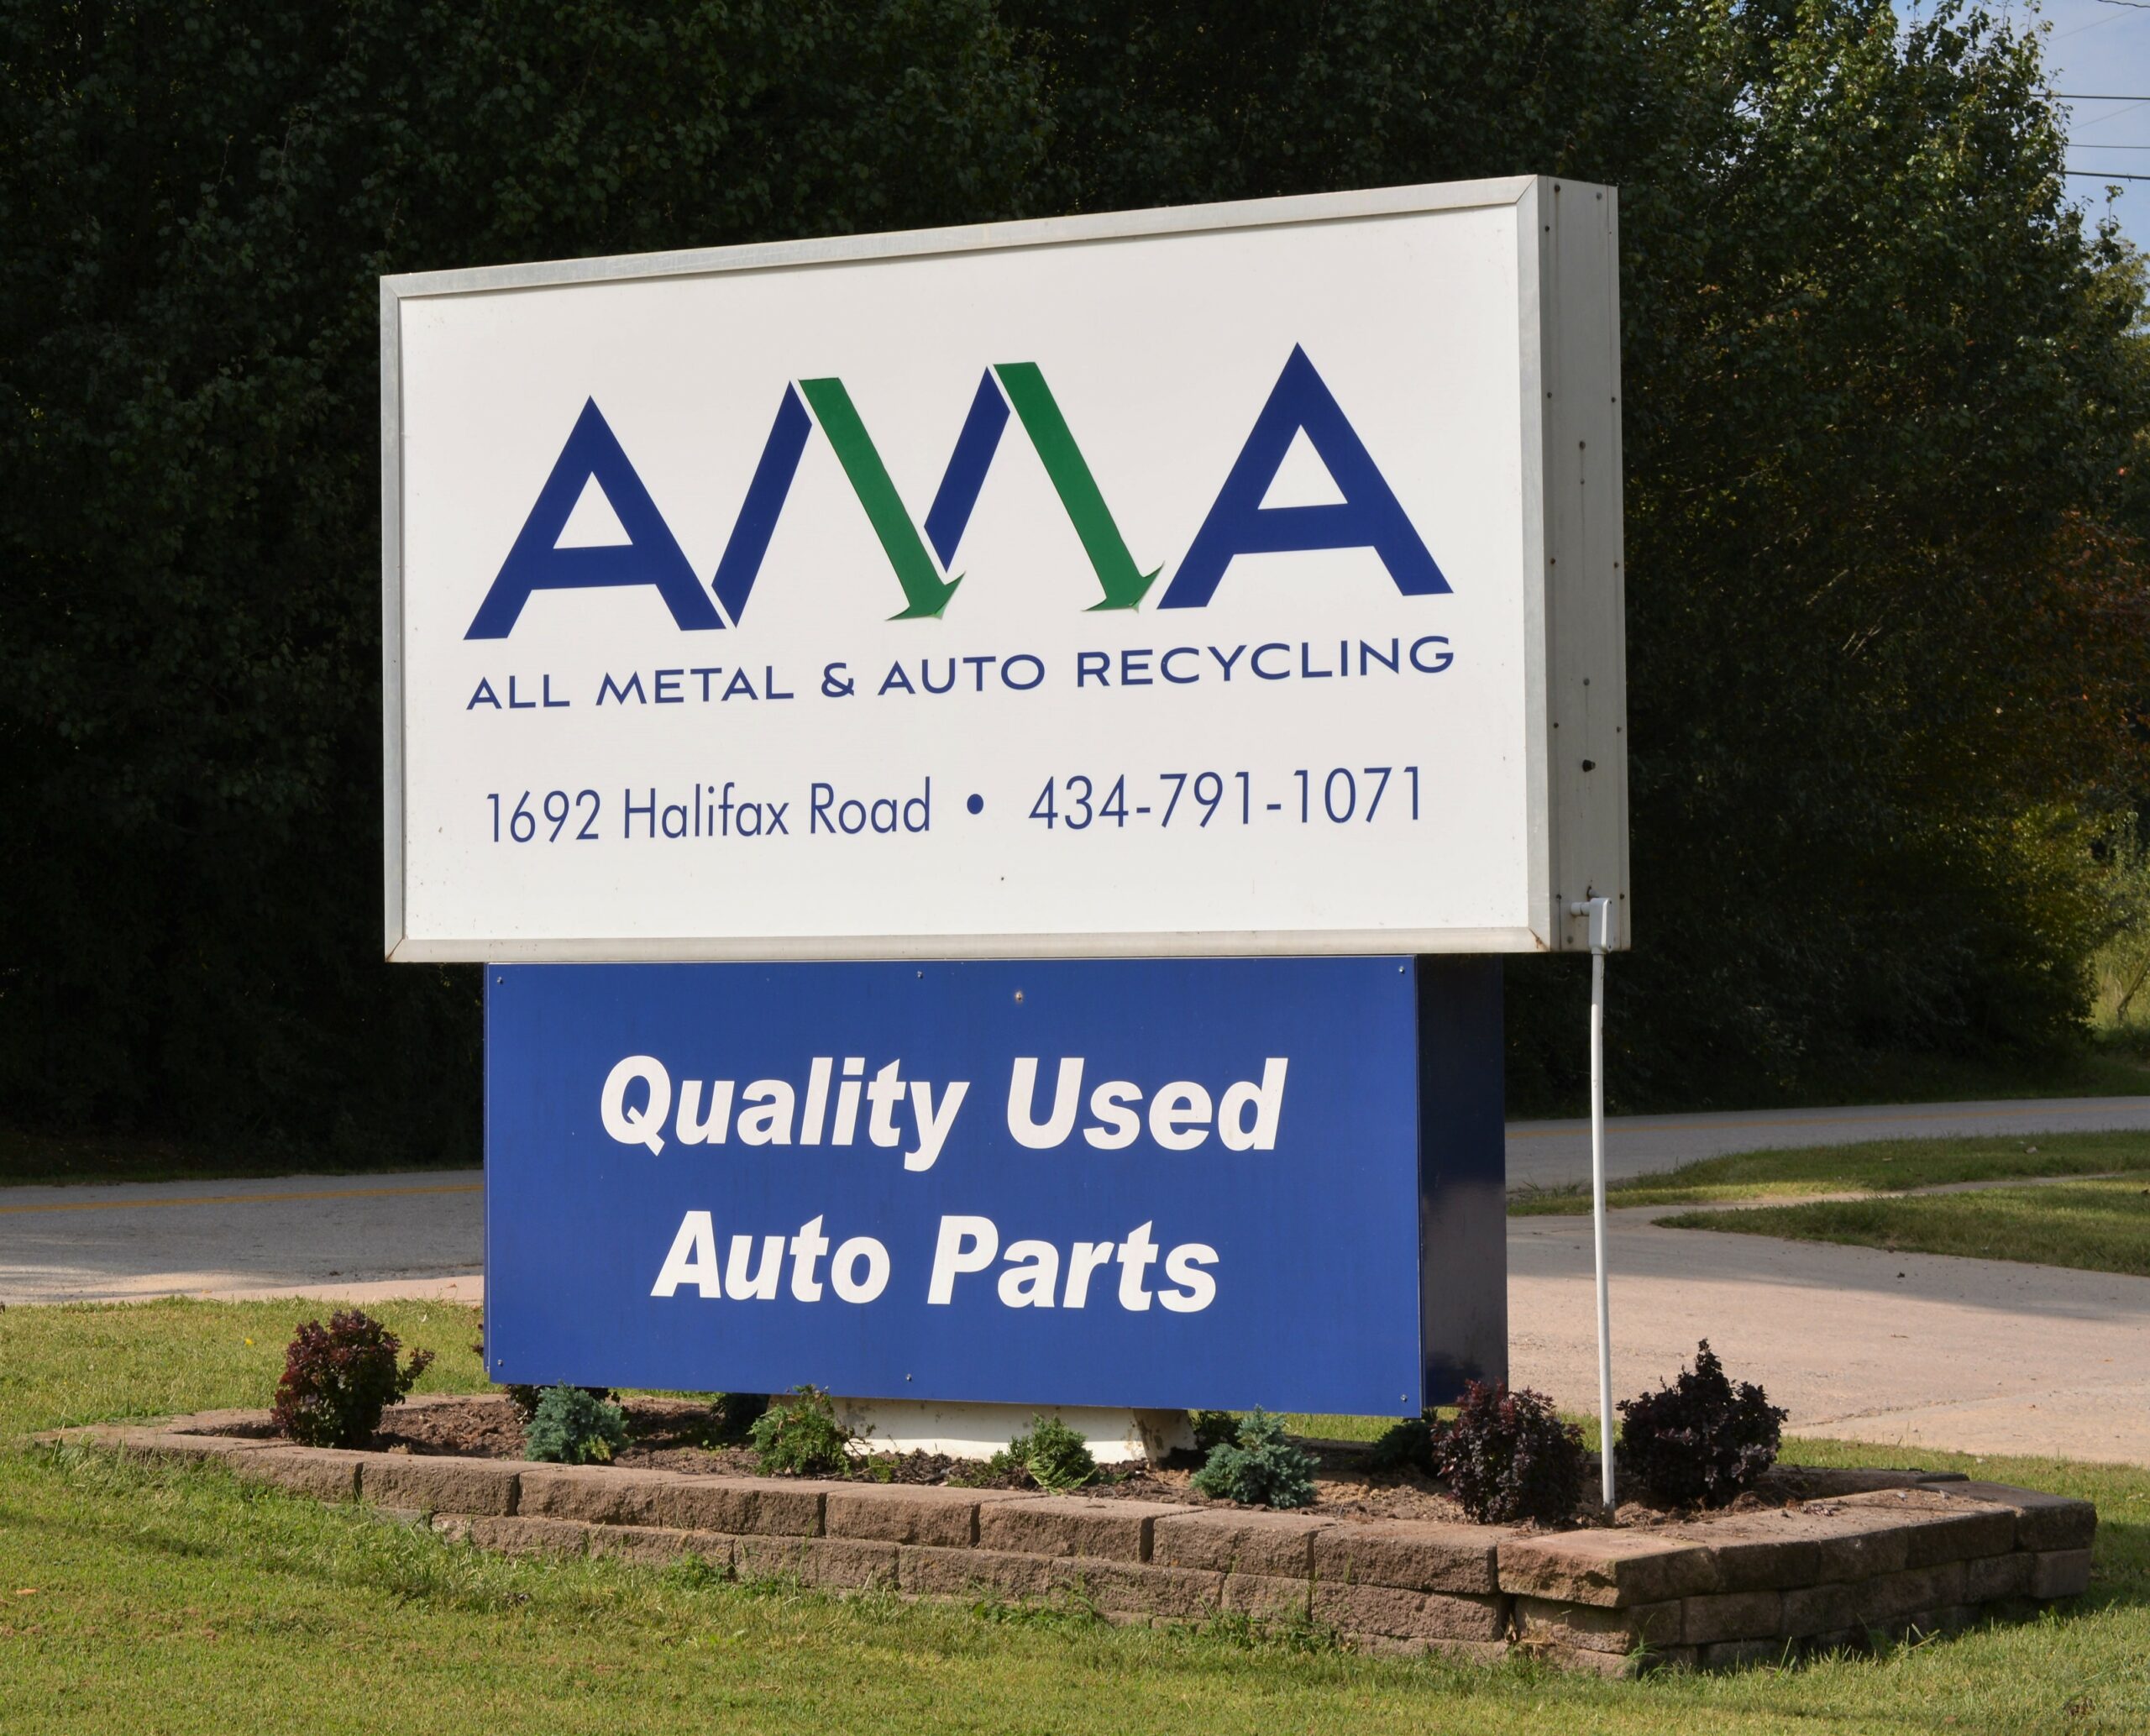 All Metal & Auto Recycling